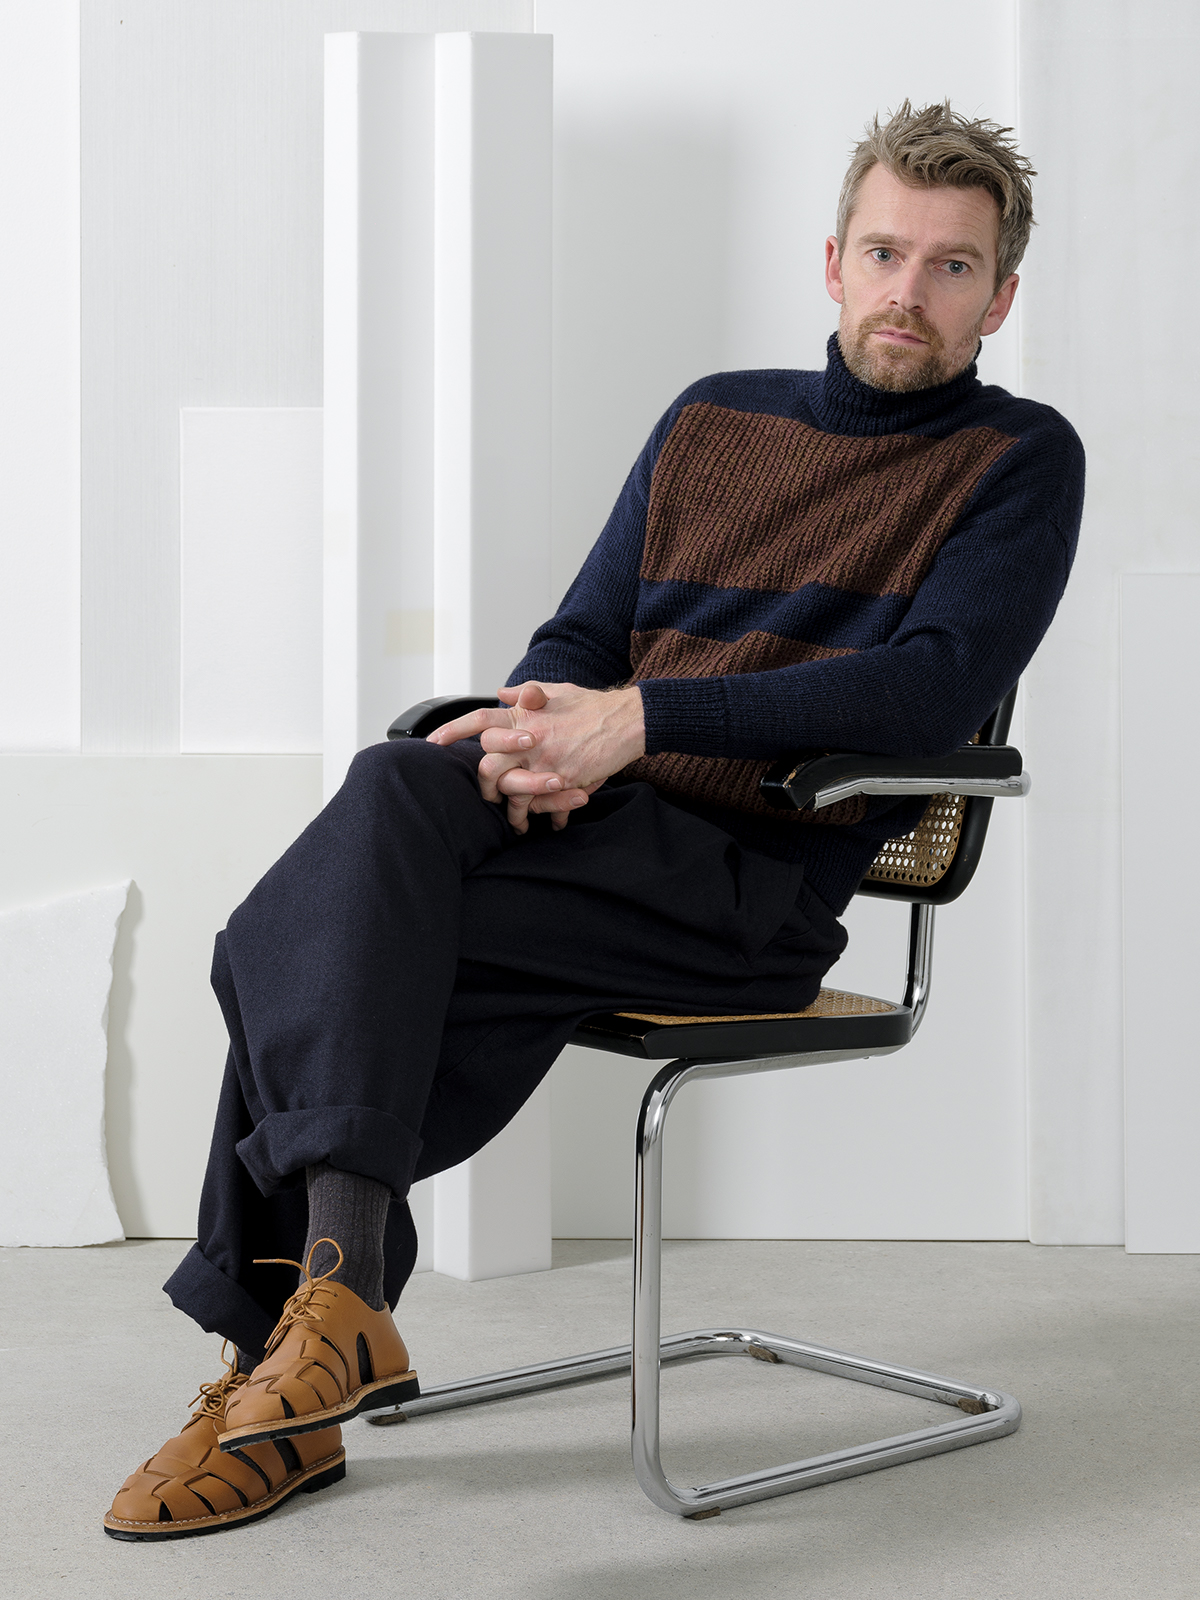 Baby Alpaca & Wool sweaters and cardigans for man | KNITBRARY